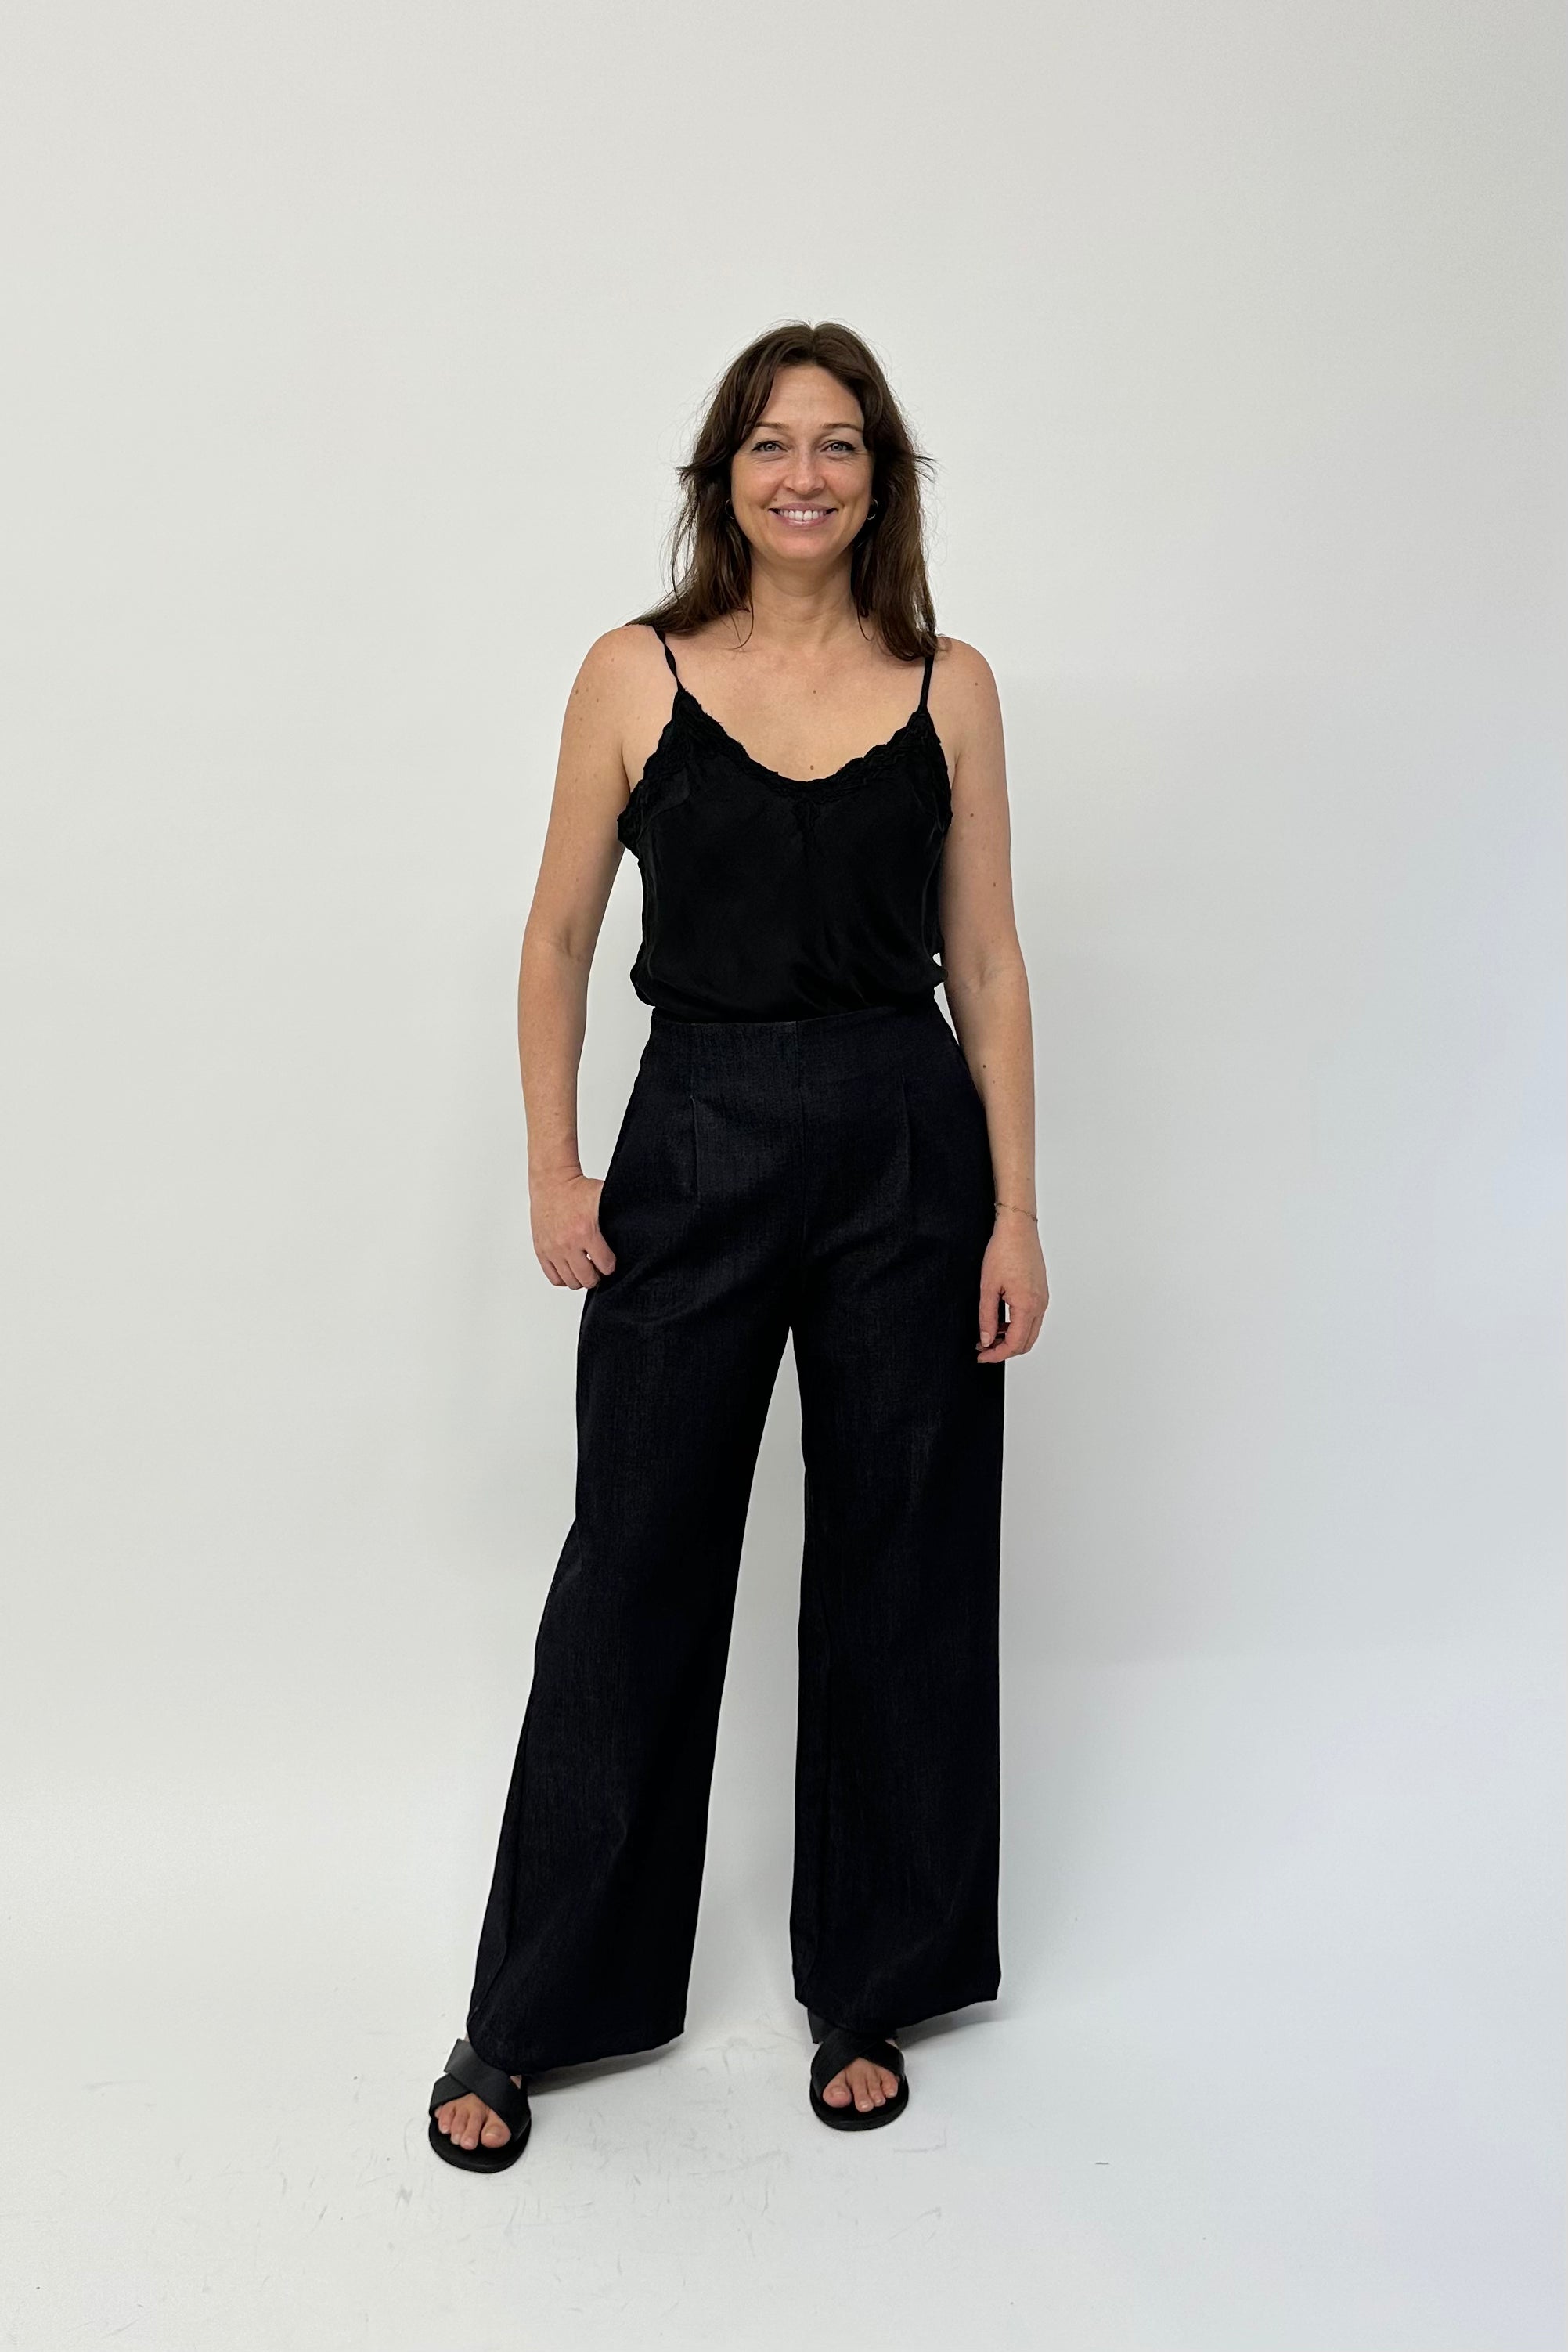 Japanese denim pant. made in australia. Featuring high waist, elasticated back and wide leg.